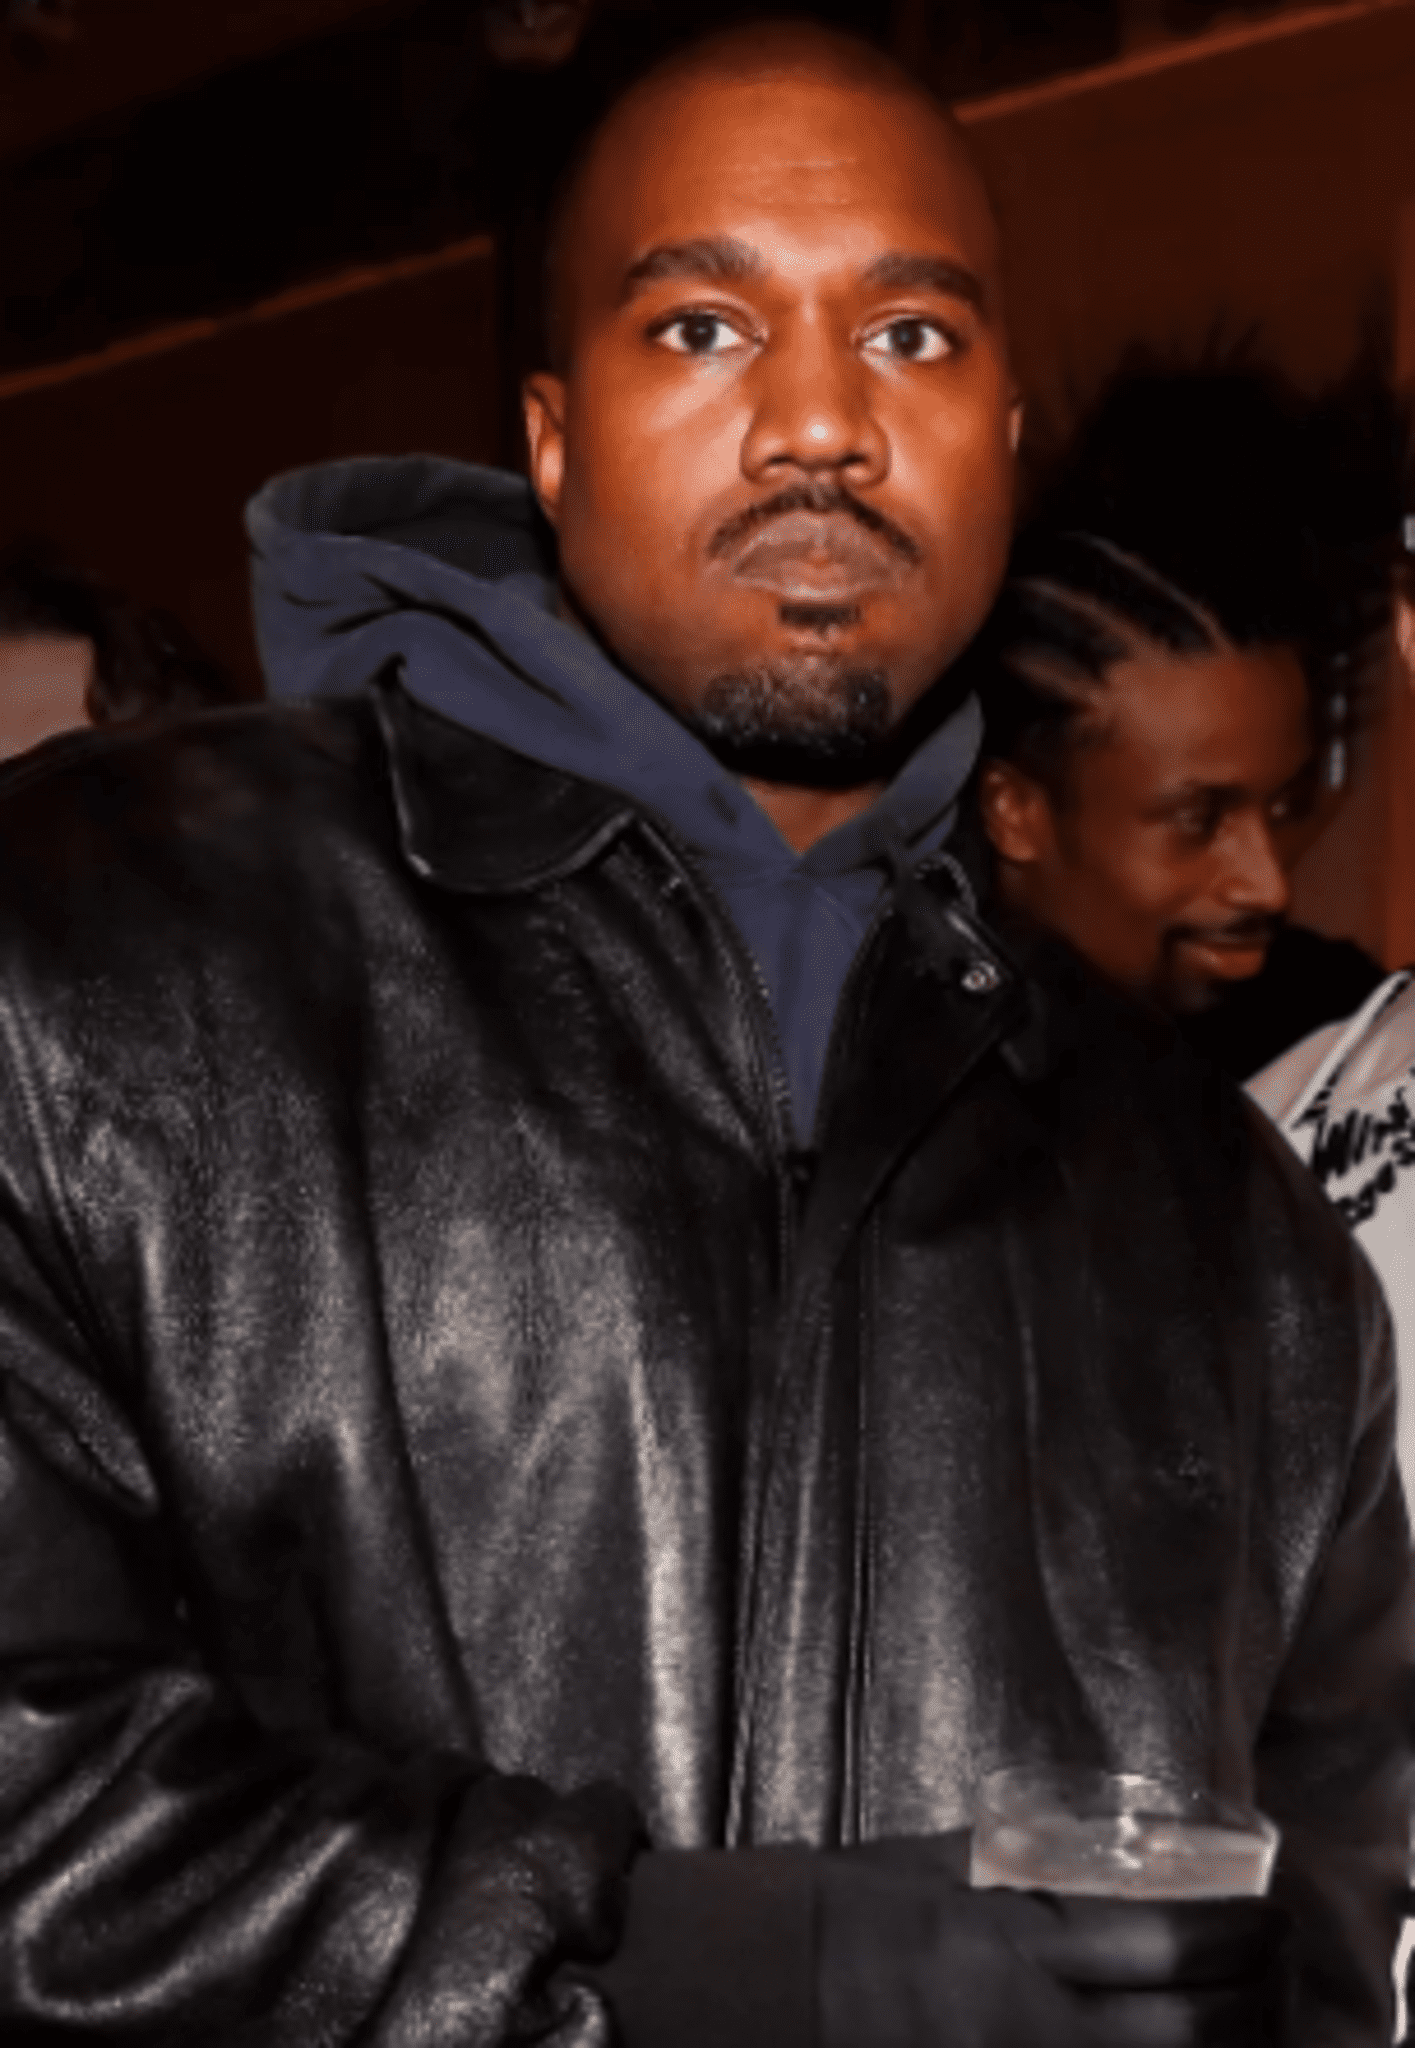 Kanye West Has Stated That The Widespread Belief That He Is Insane Causes Him Emotional Distress